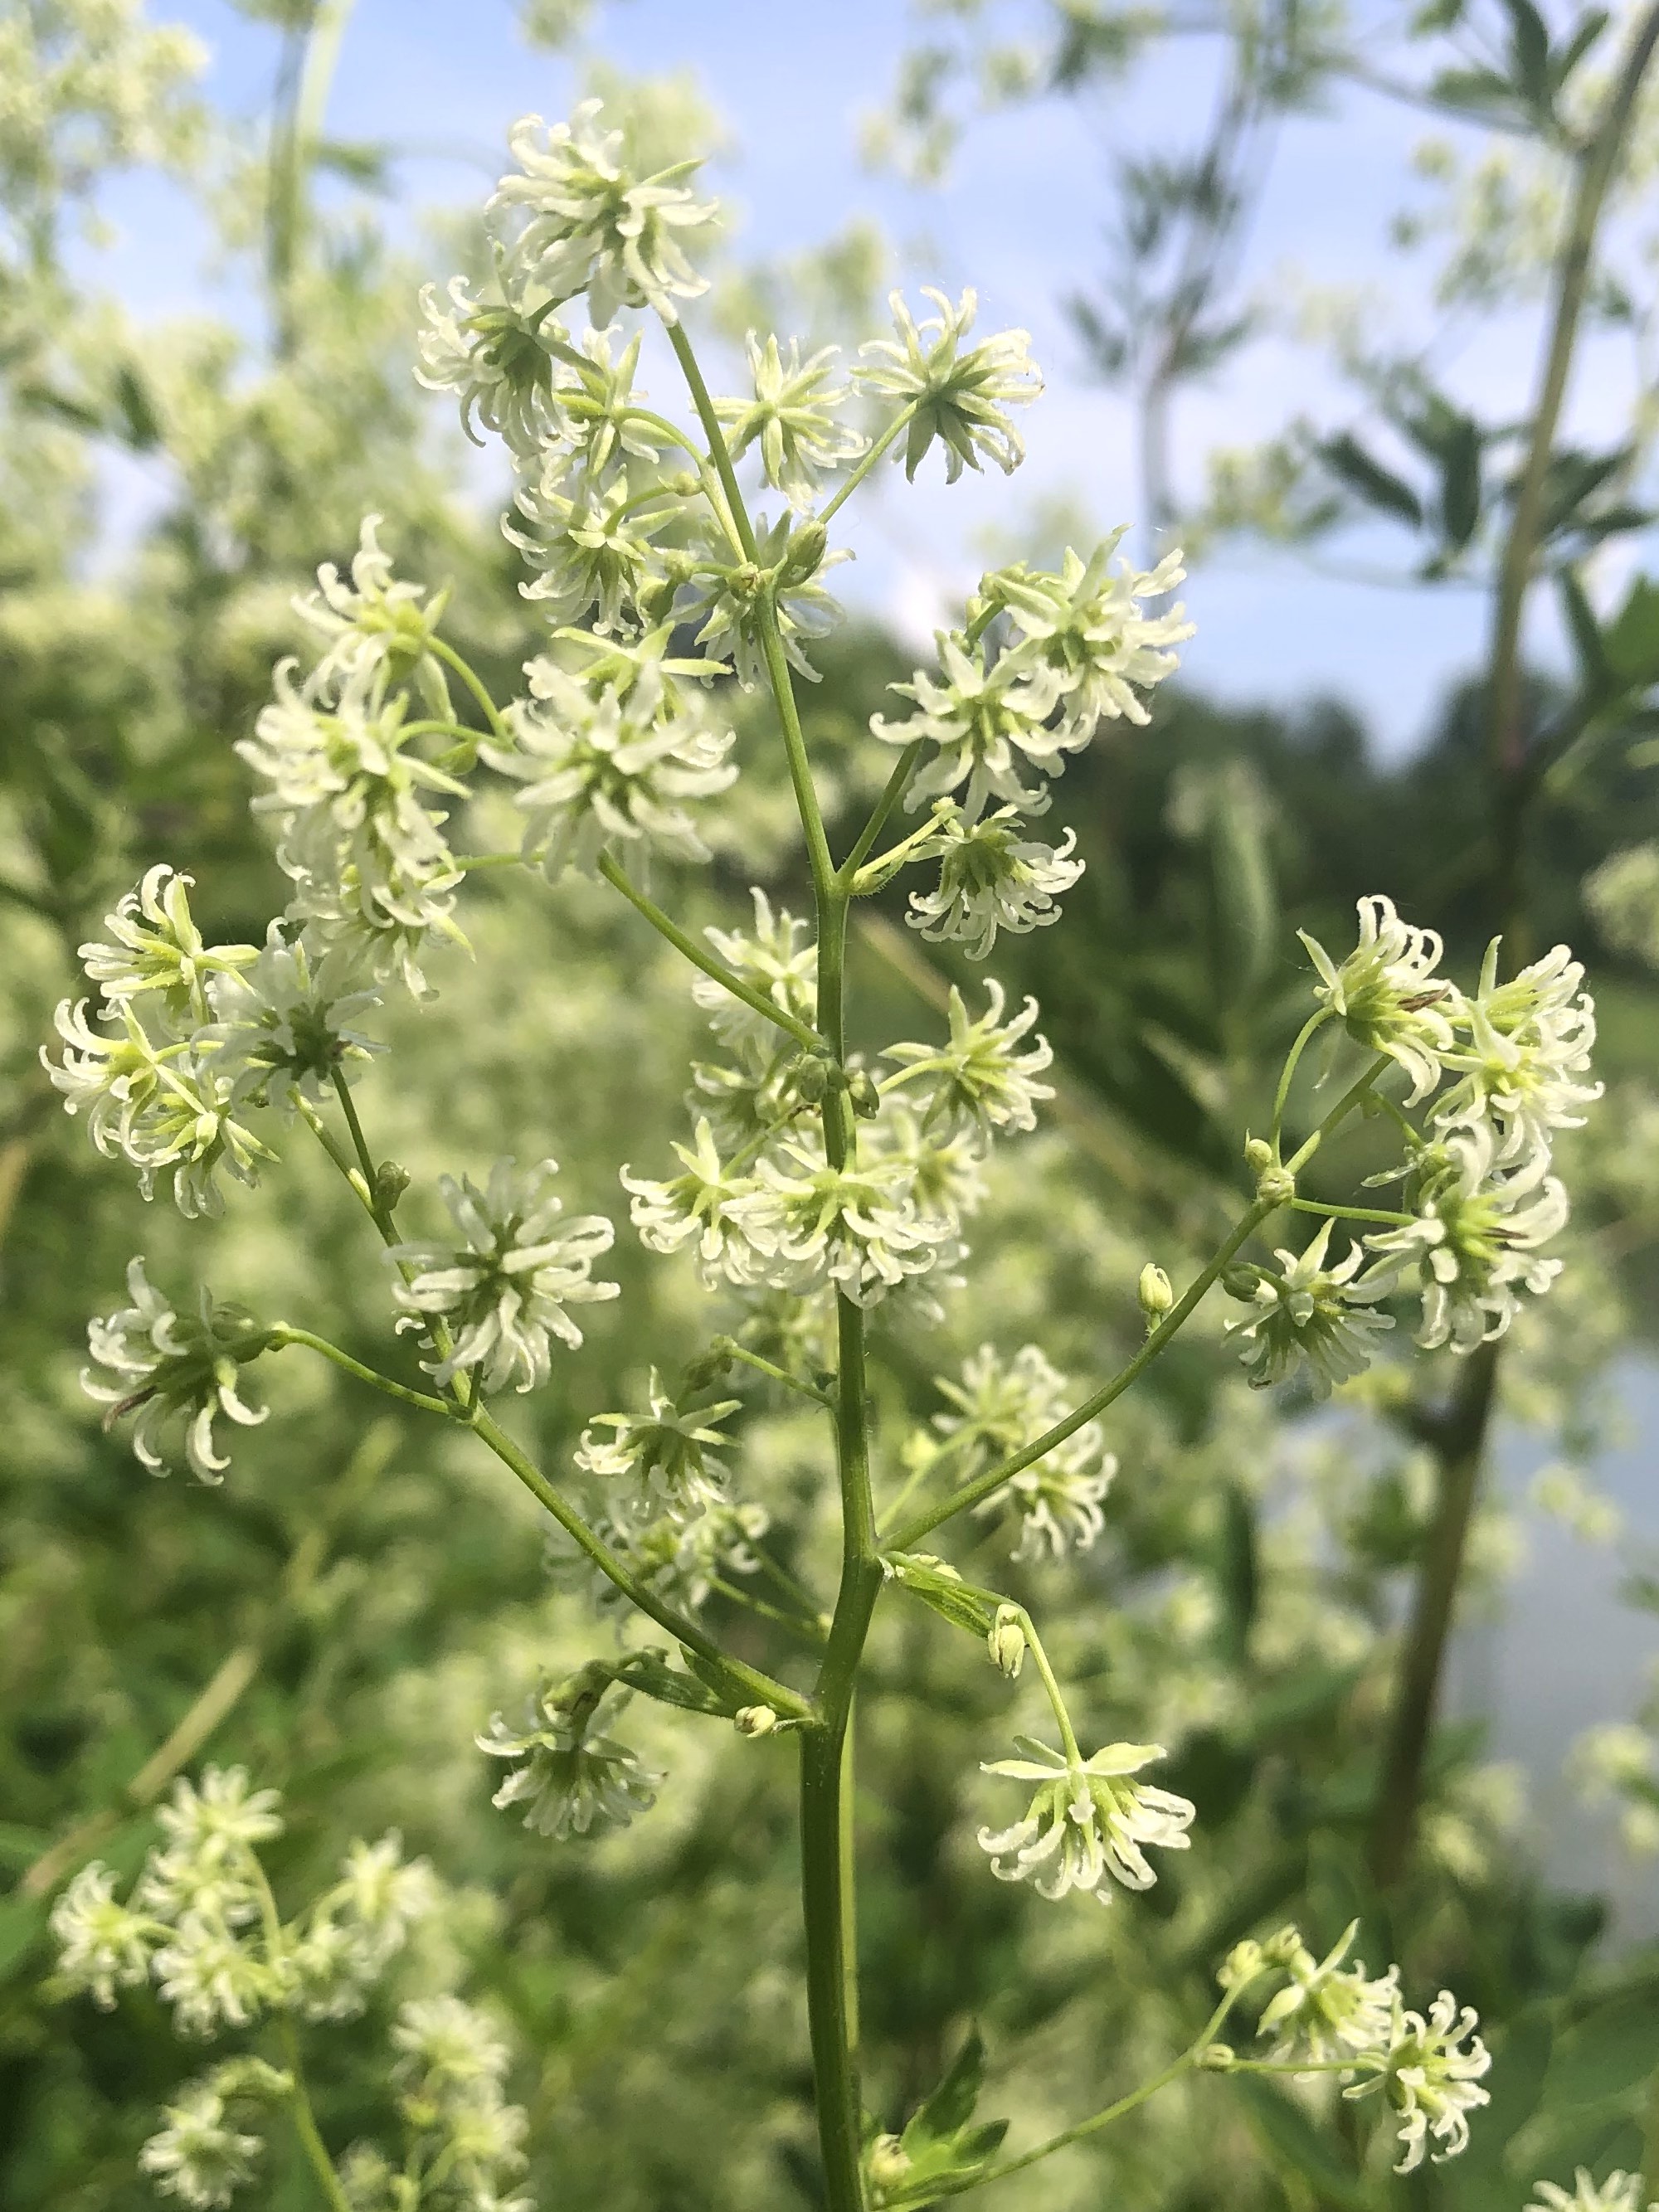 Tall Meadow-rue on shore of Retaining Pond on July 1, 2020.